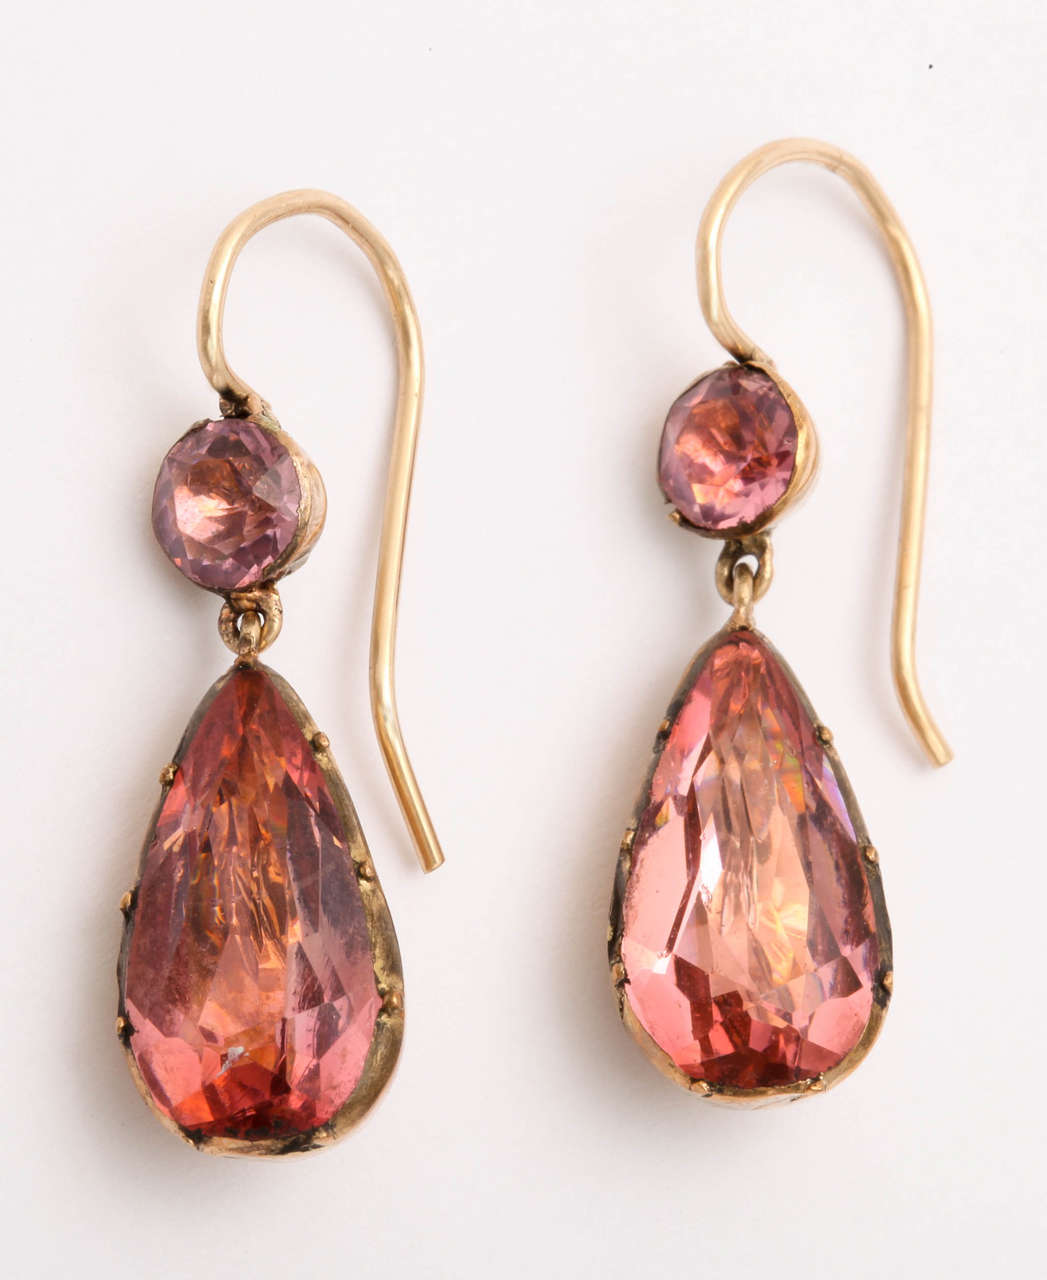 Set in 15kt gold, these Georgian era saturated pink paste stones are faceted beautifully and foiled to perfection.  By the early 19th century the art of foiling paste and gemstones was well advanced and had shined in many nations of the world.